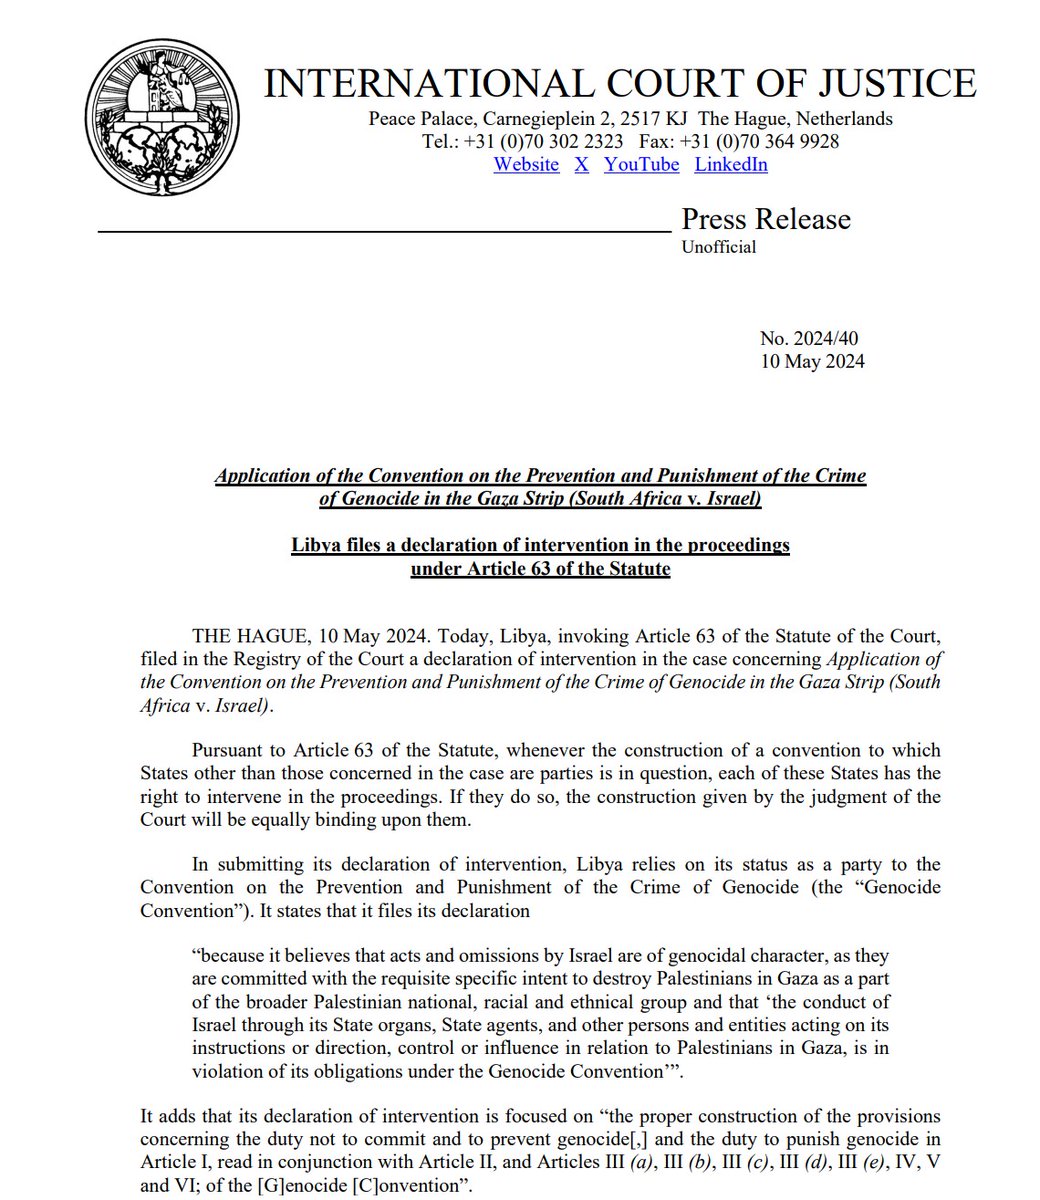 Libya files a declaration of intervention under Article 63 of the ICJ Statute in the case concerning Application of the Convention on the Prevention and Punishment of the Crime of Genocide in the Gaza Strip